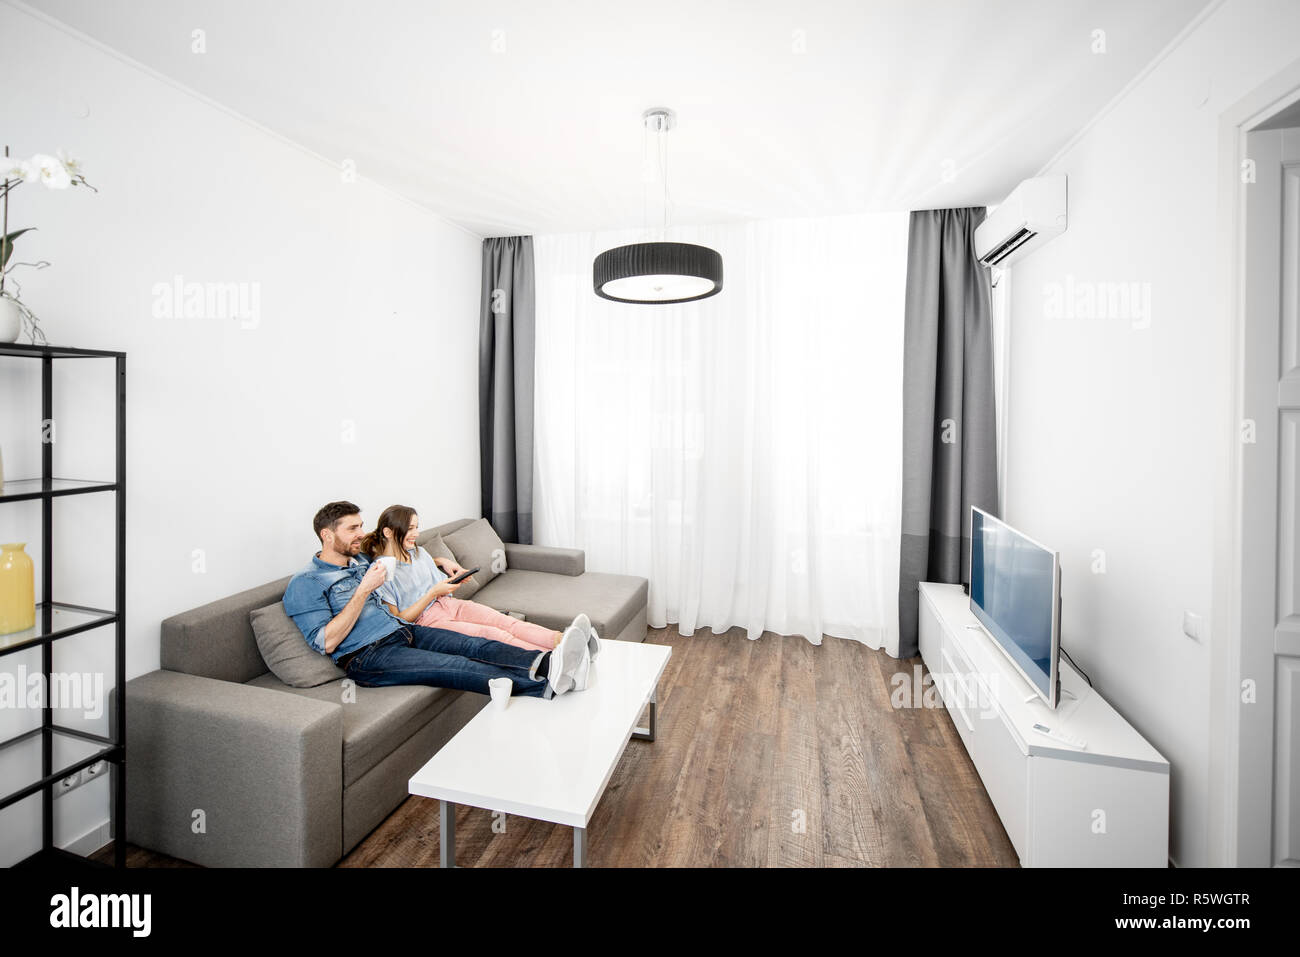 Young couple sitting together on the couch and watching TV at home. Wide interior view Stock Photo